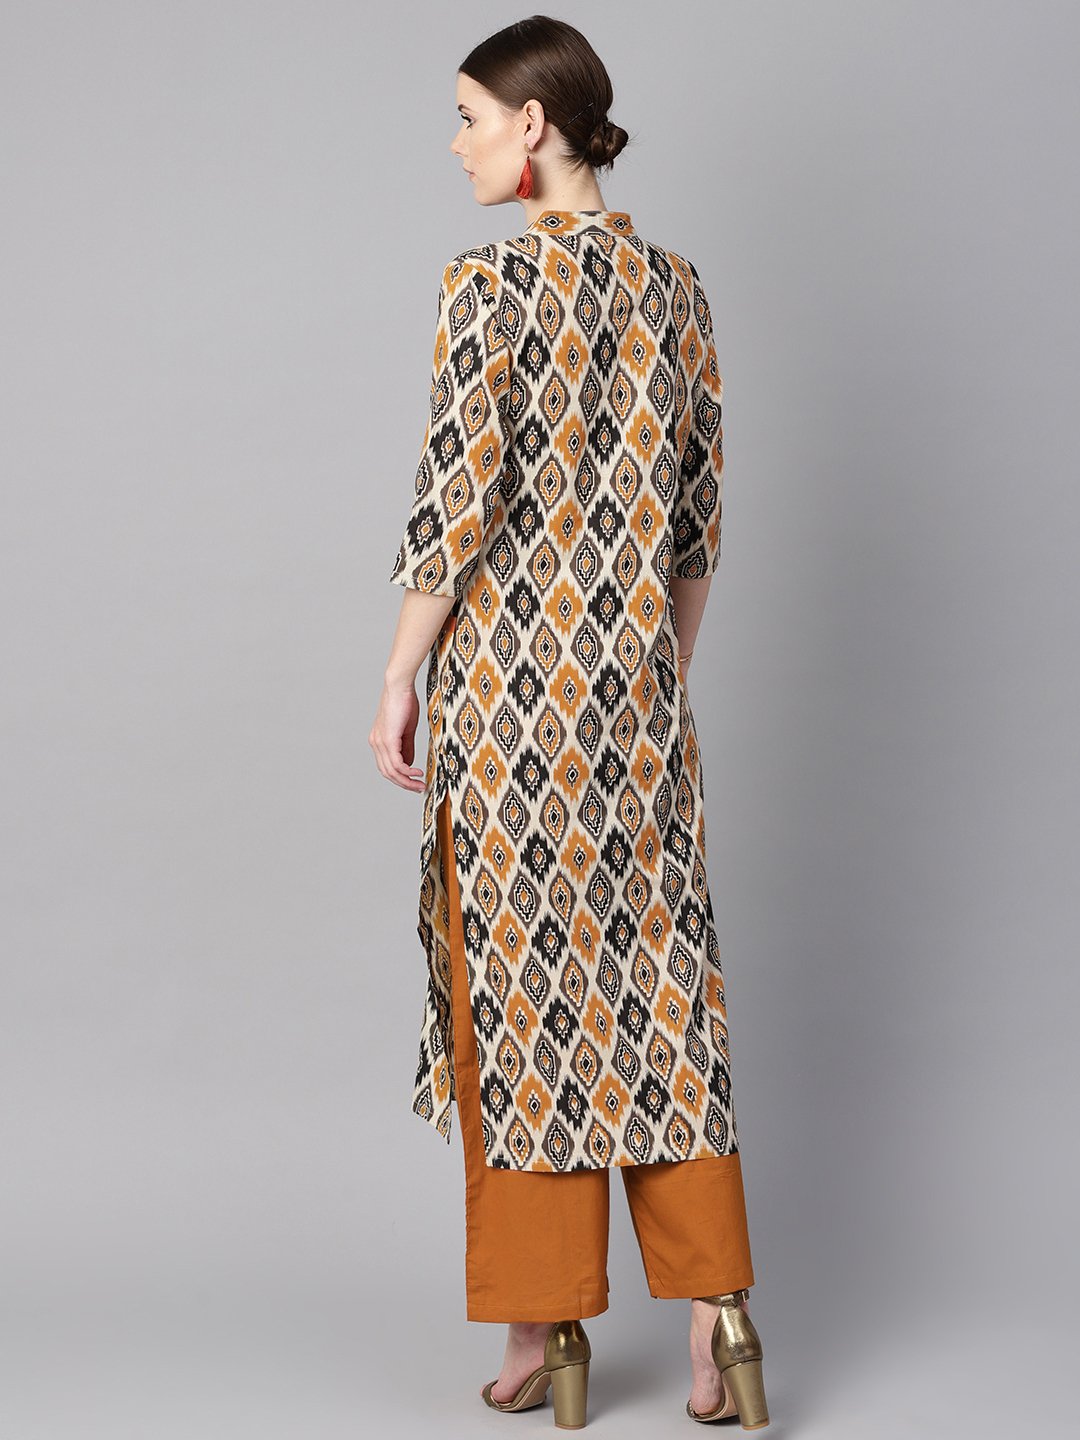 Women's Brown Printed Half Sleeve With Pocket Details Kurta Set With Solid Brown Pants - Nayo Clothing